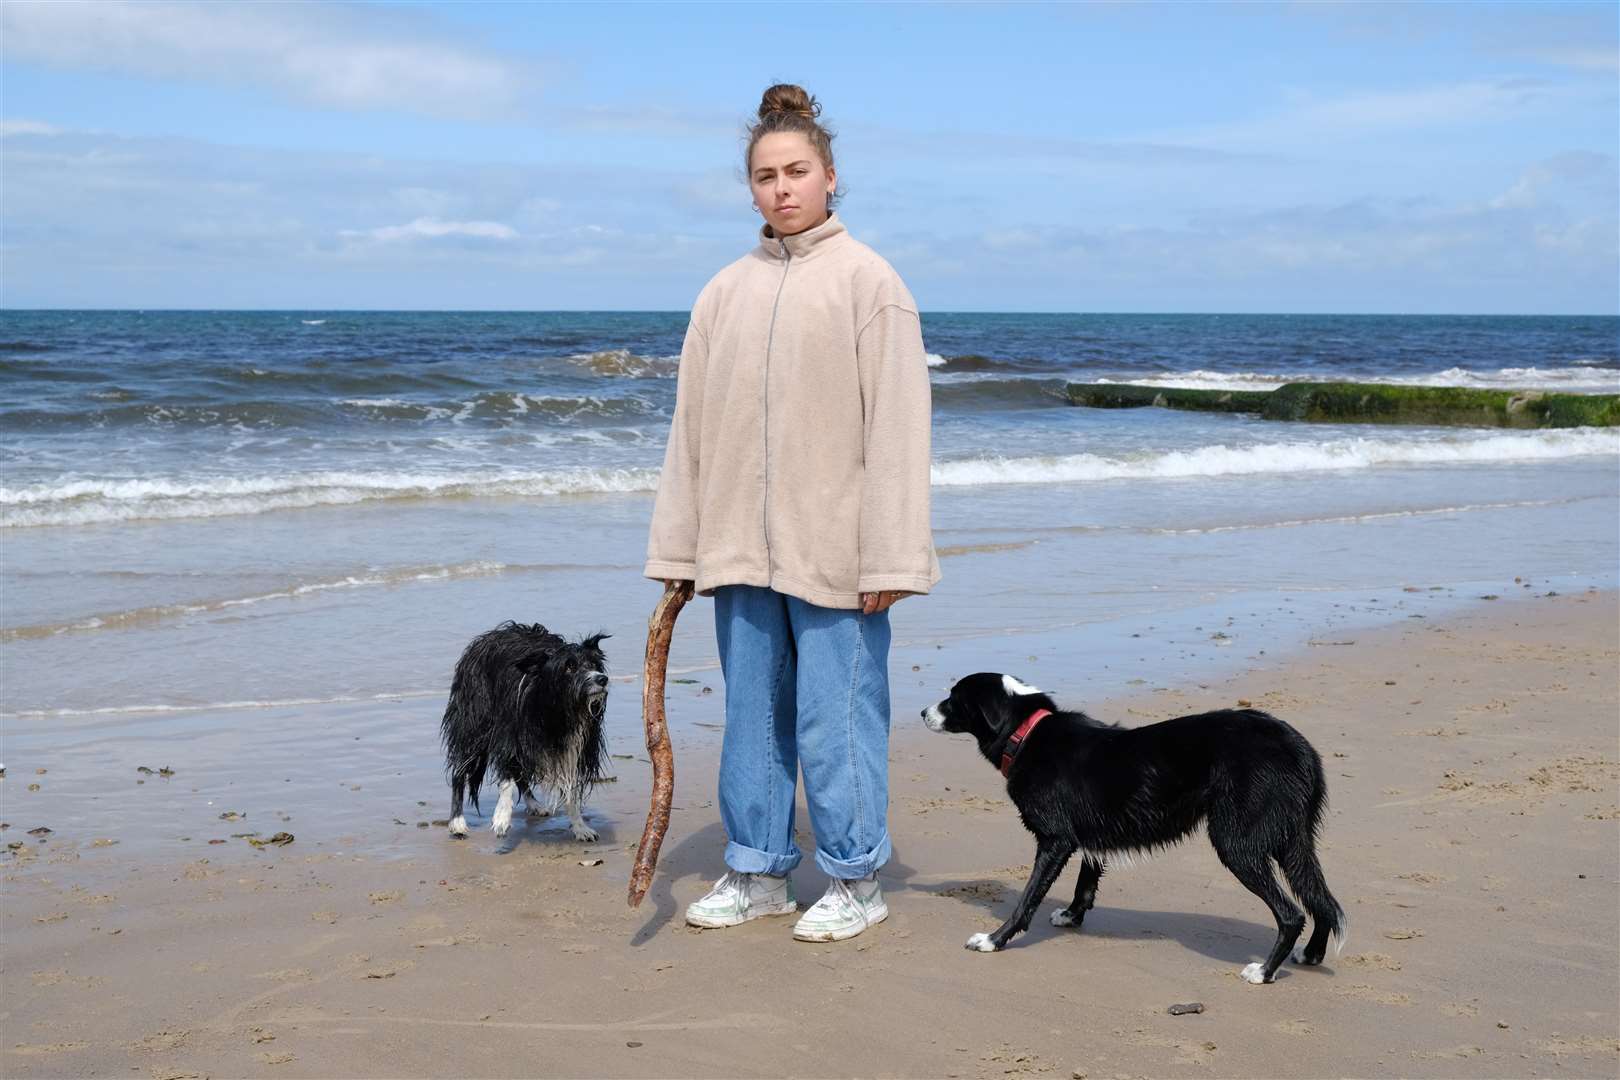 Elena was pictured on the beach with her dogs in June 2020.